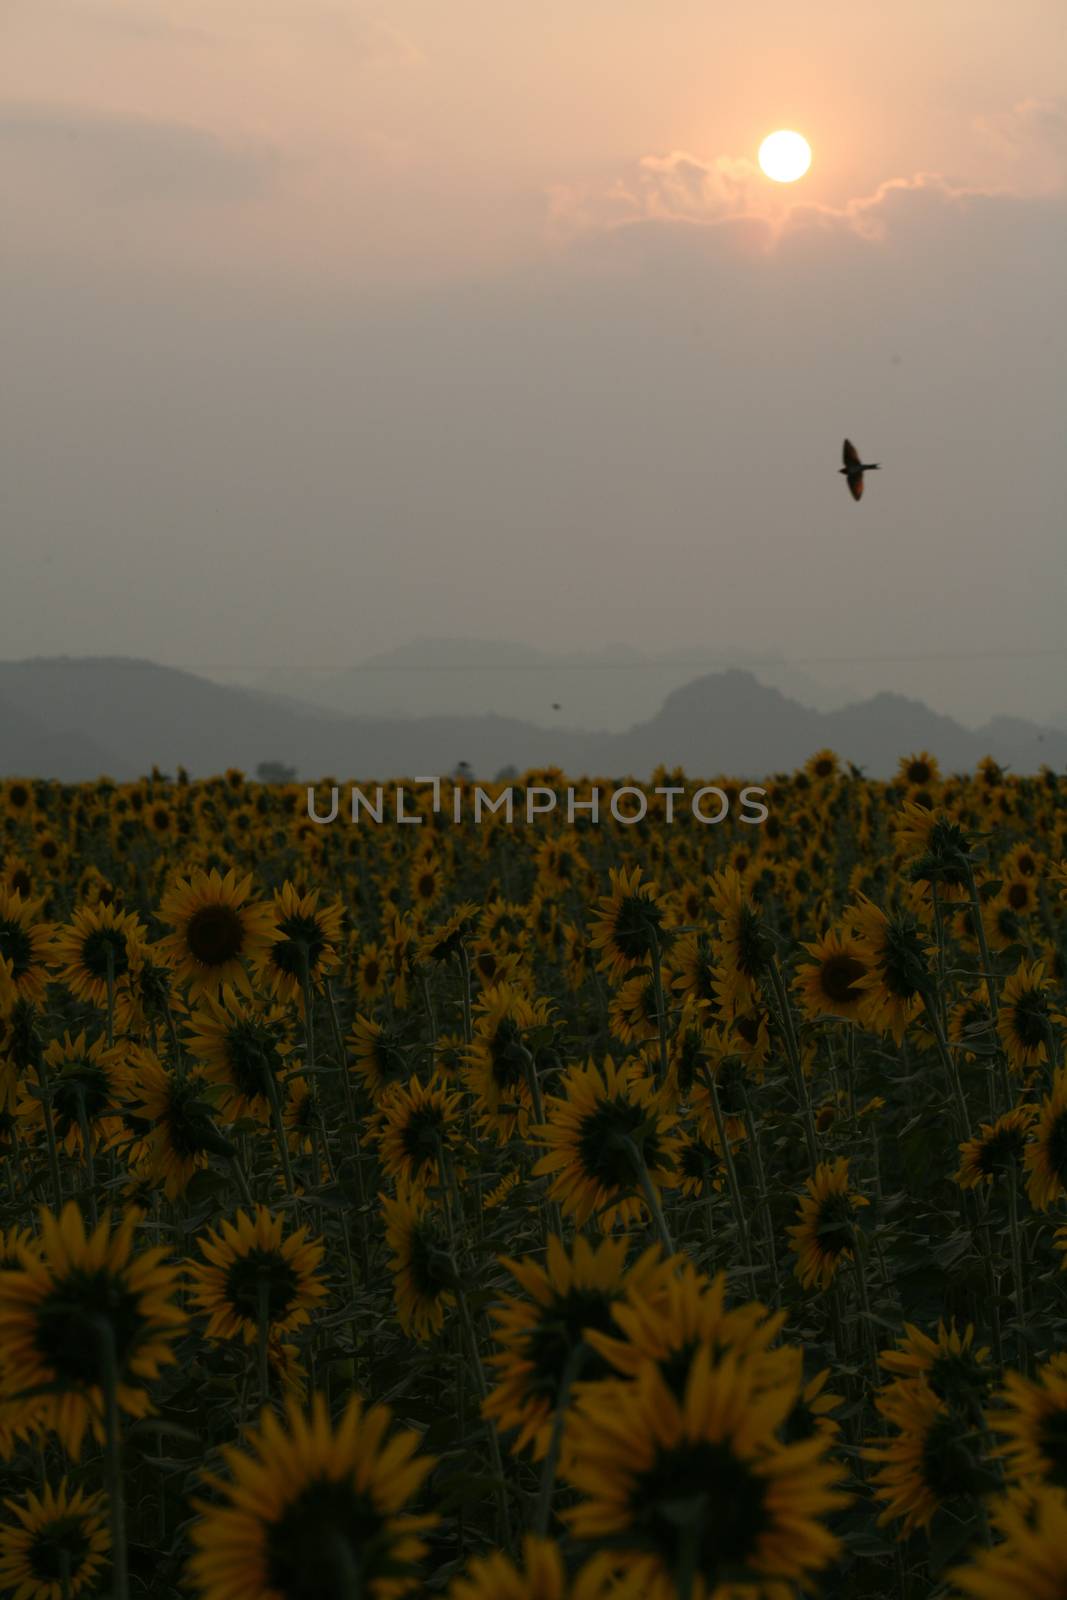 A field of sunflowers at sunset, Thailand